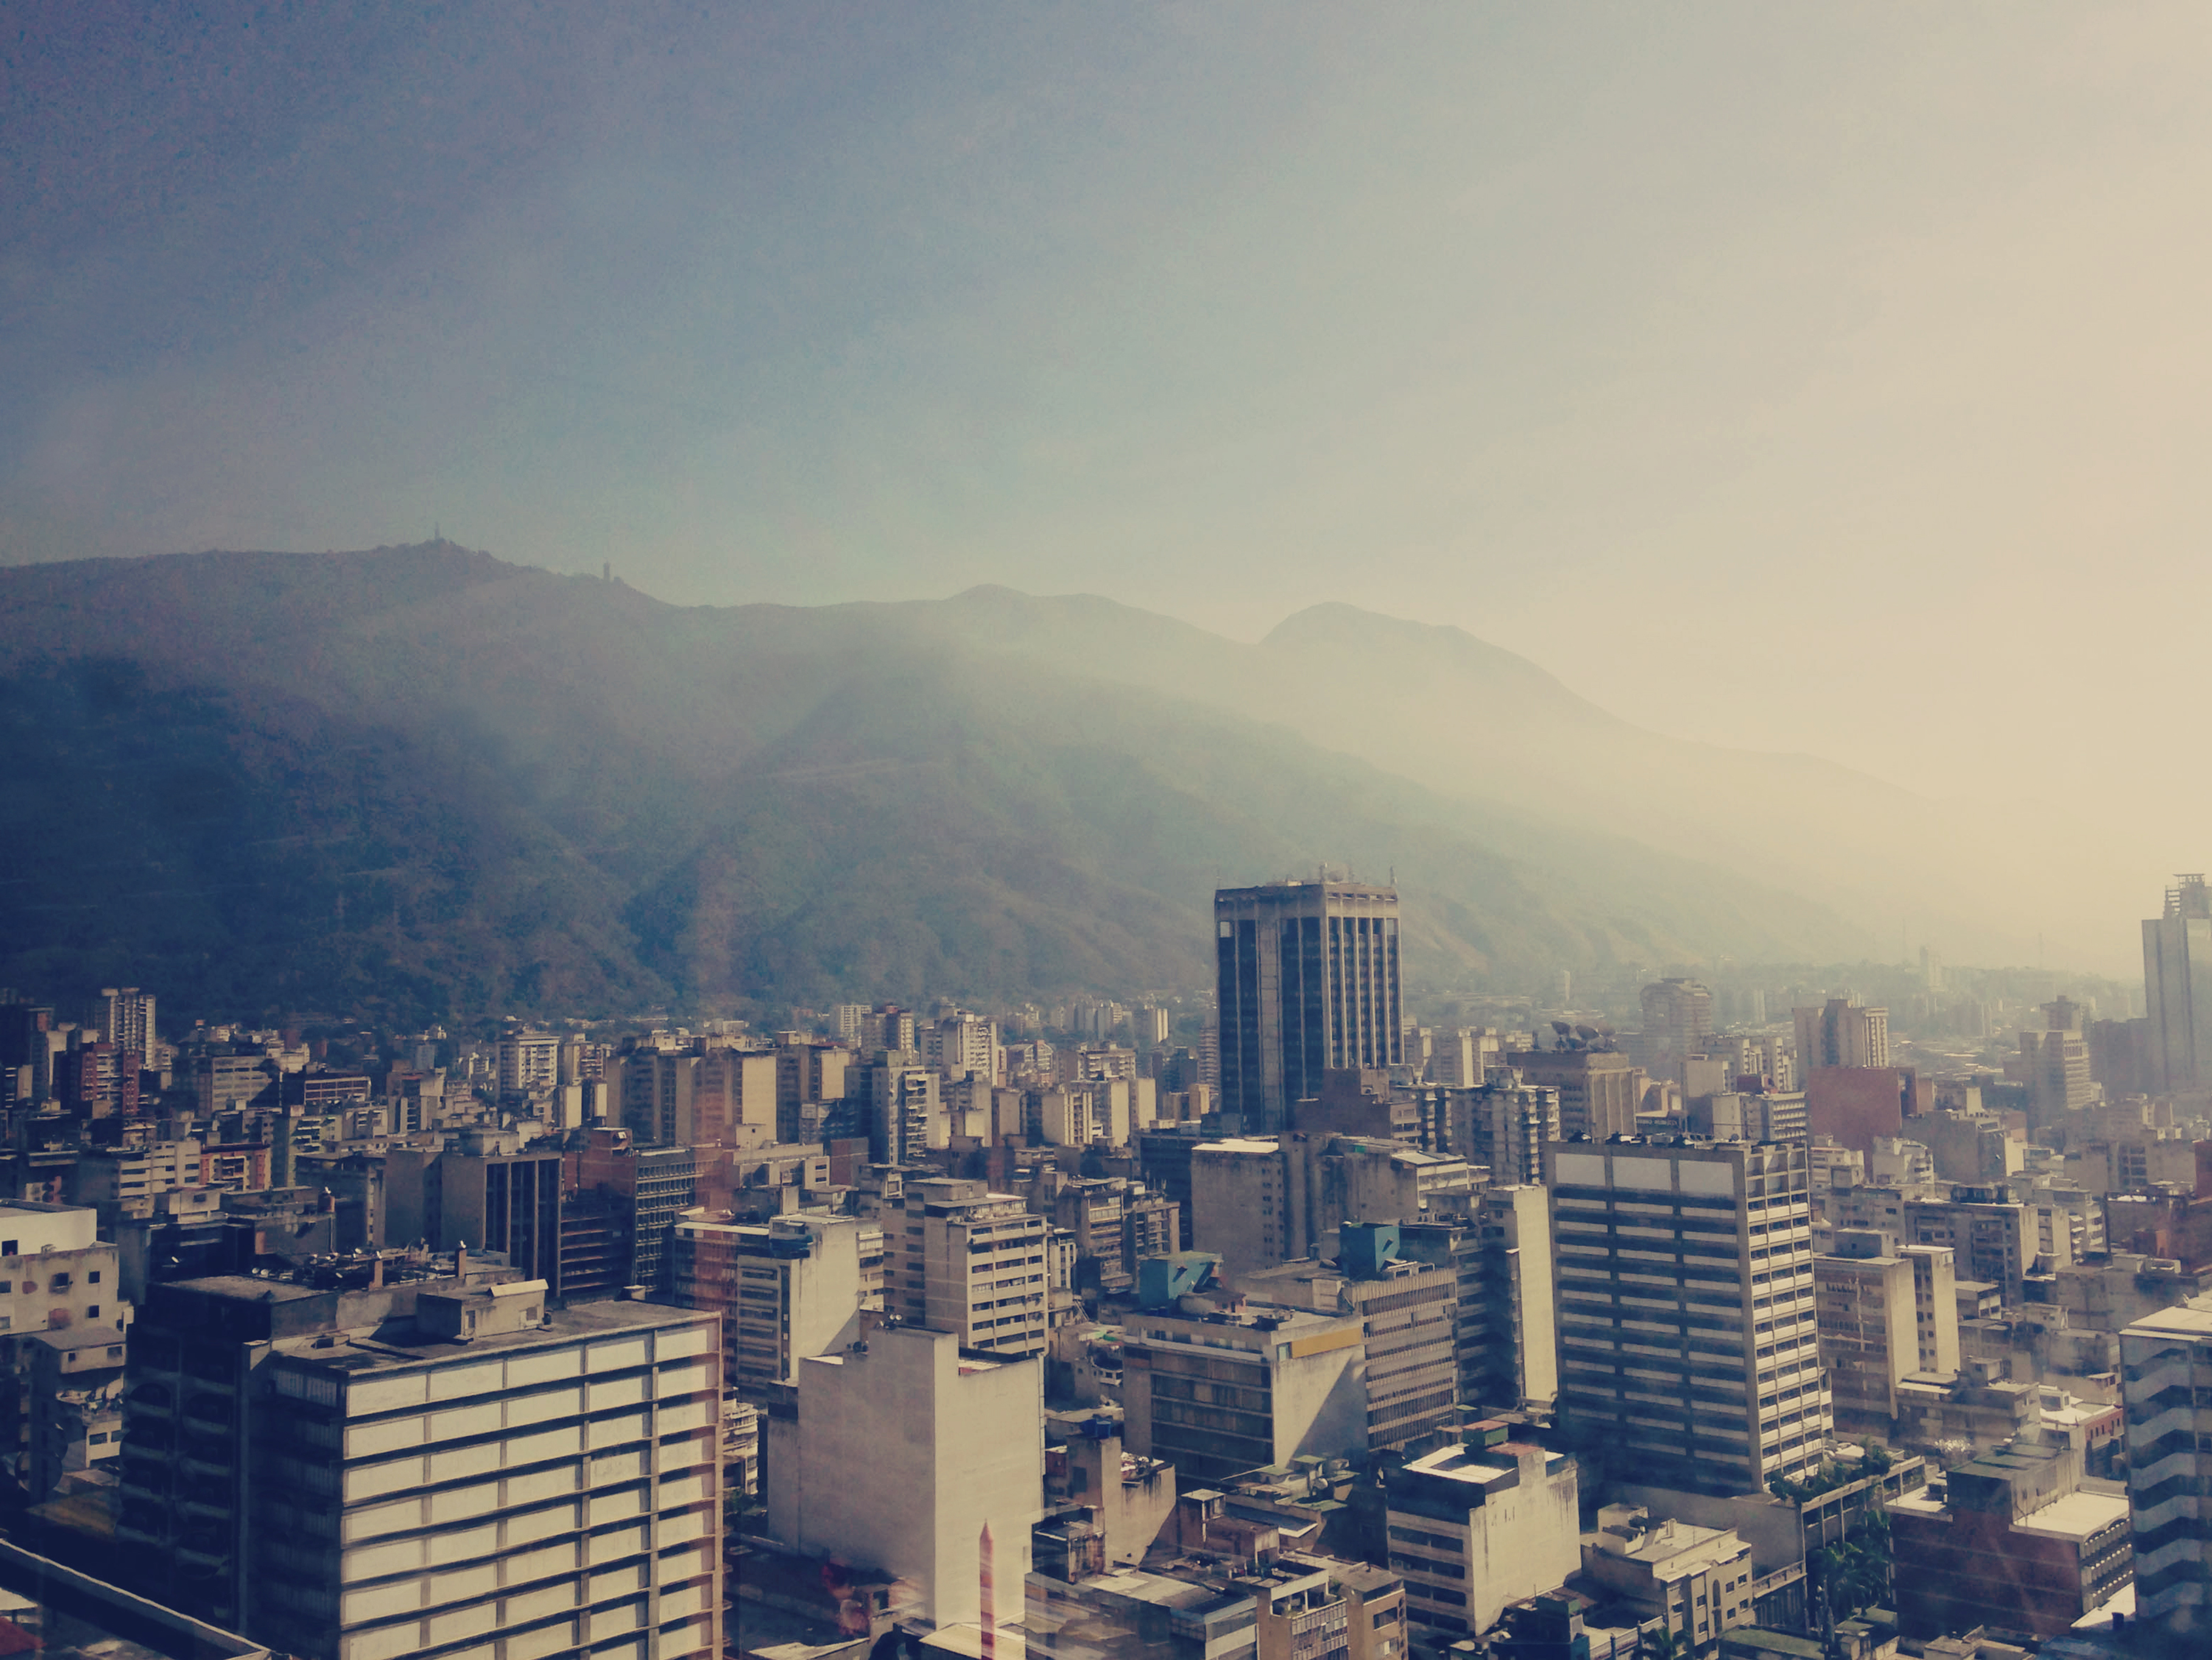 View of Central Caracas. (Getty Images)